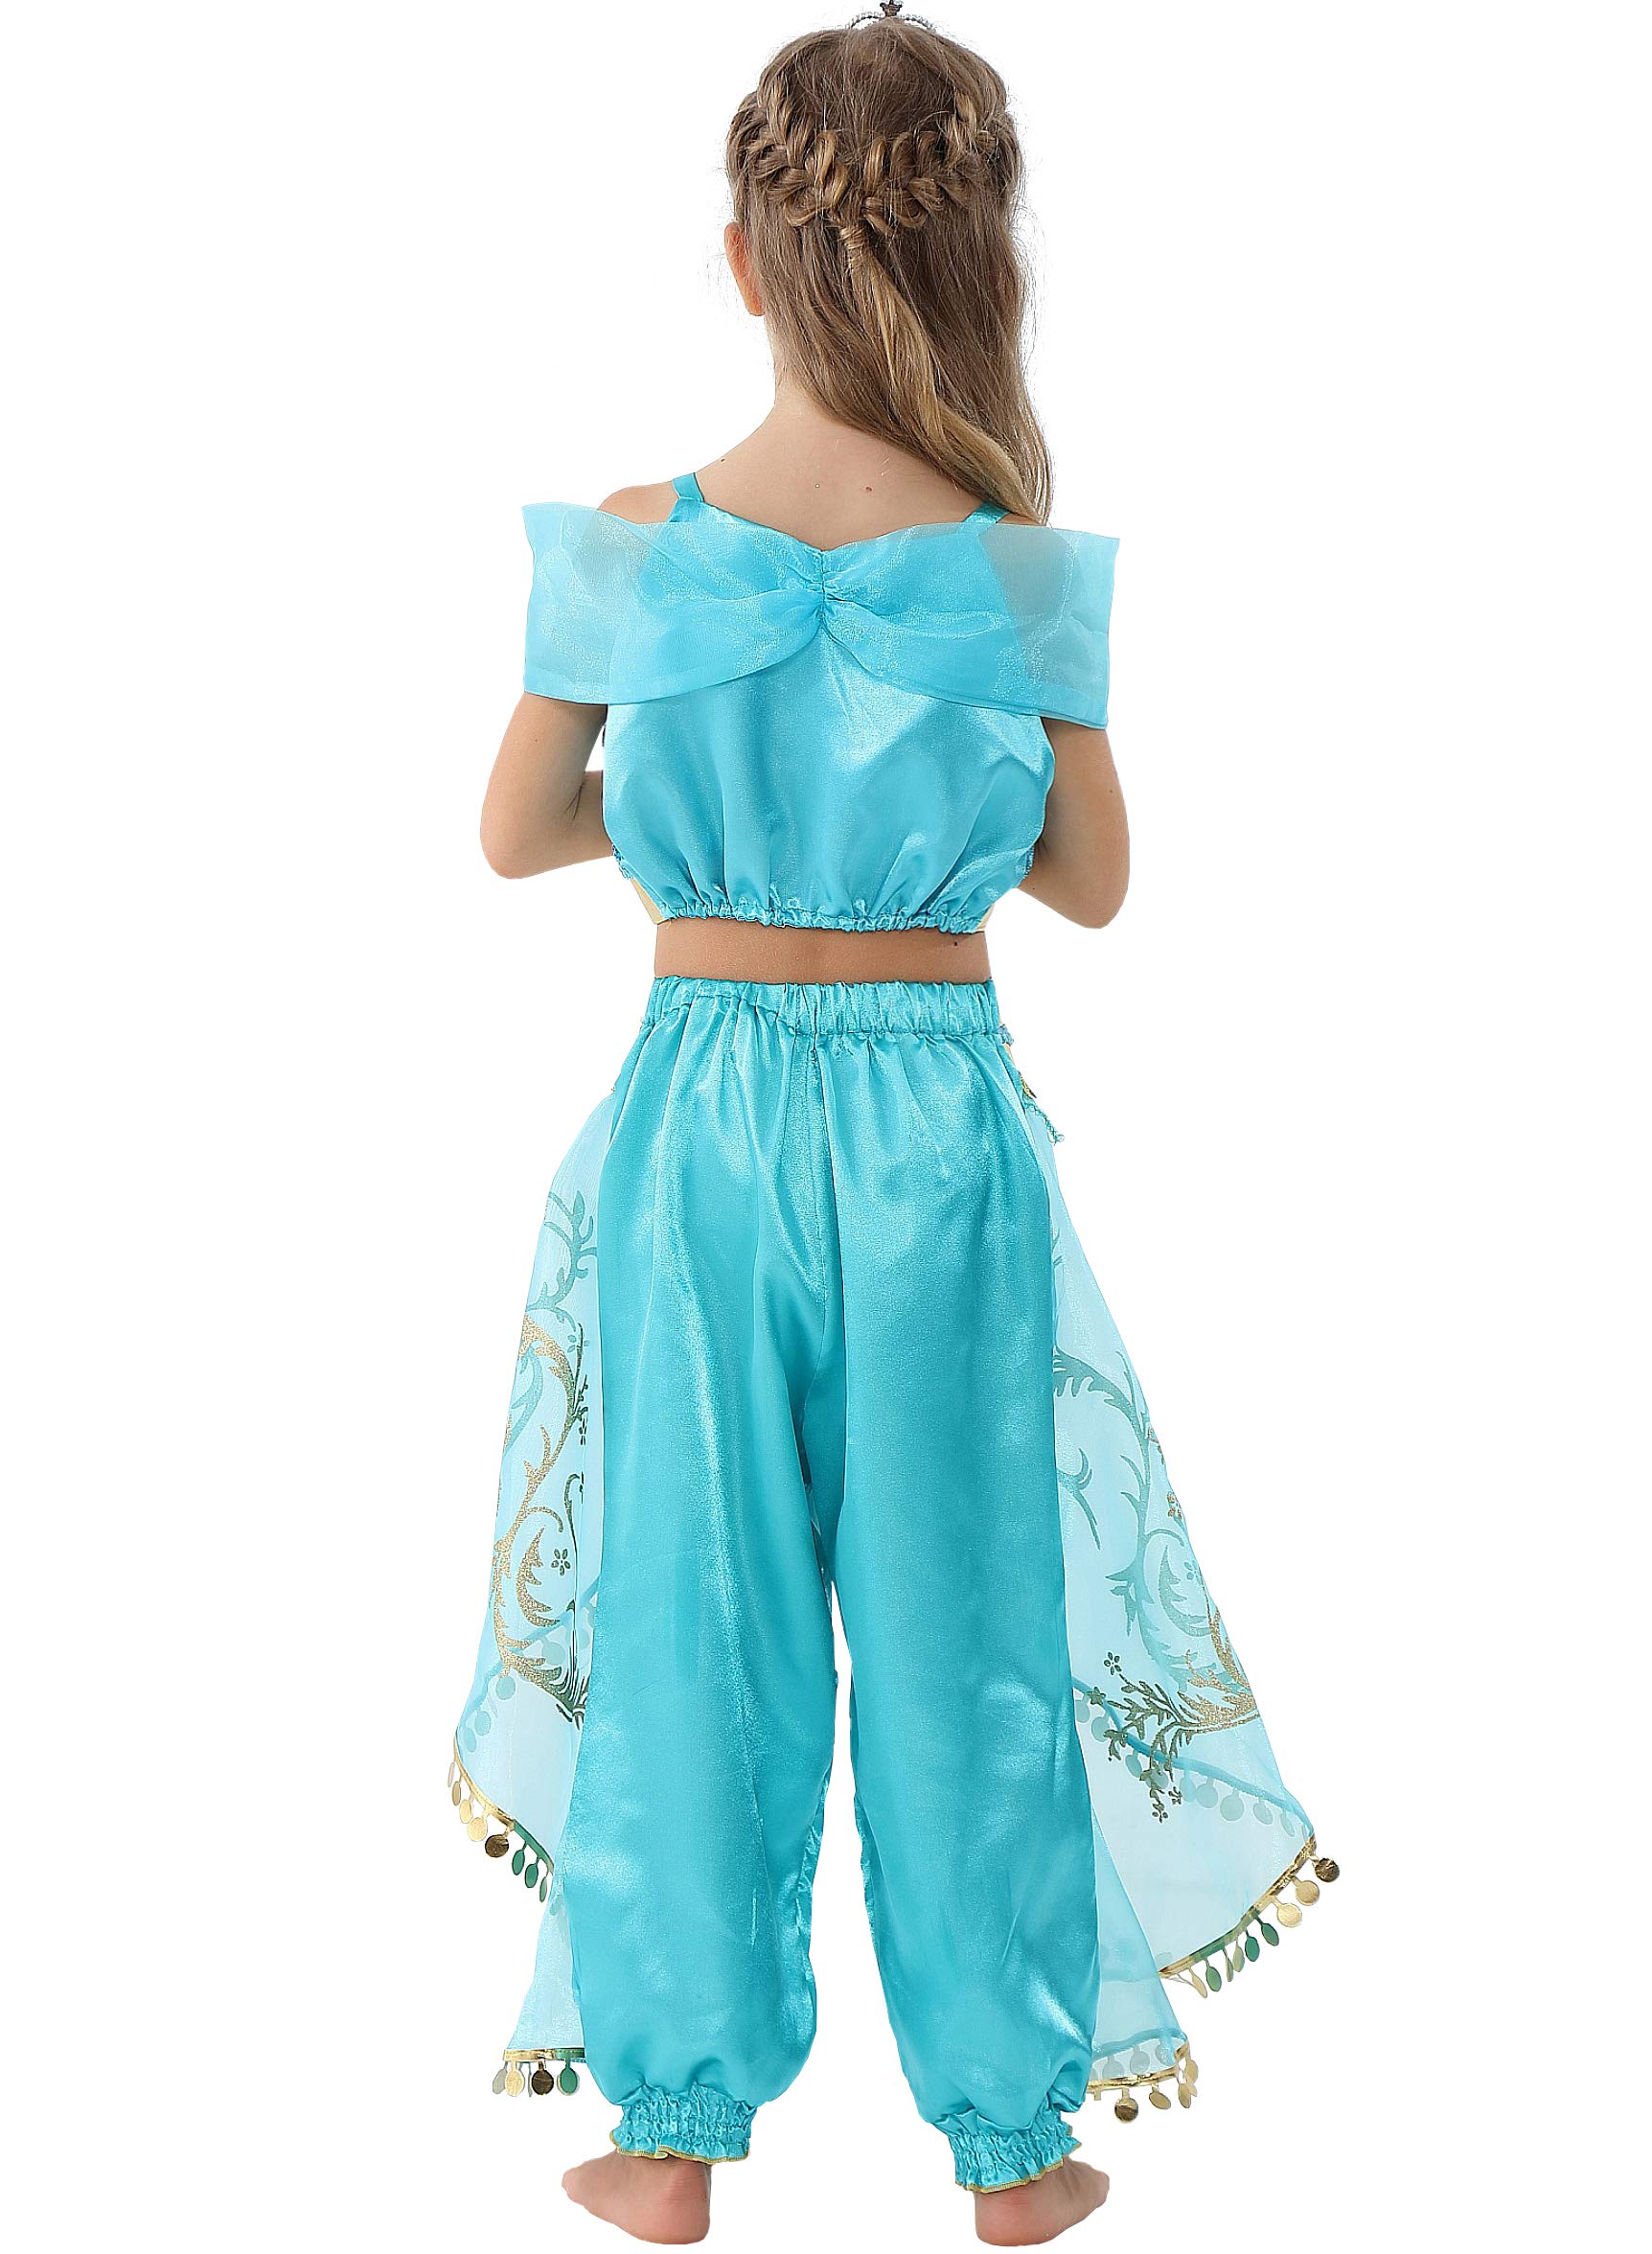 Dressy Daisy Arabian Princess Costume with Headband Halloween Party Fancy Dress Up Belly Dance Wear Outfit for Girls